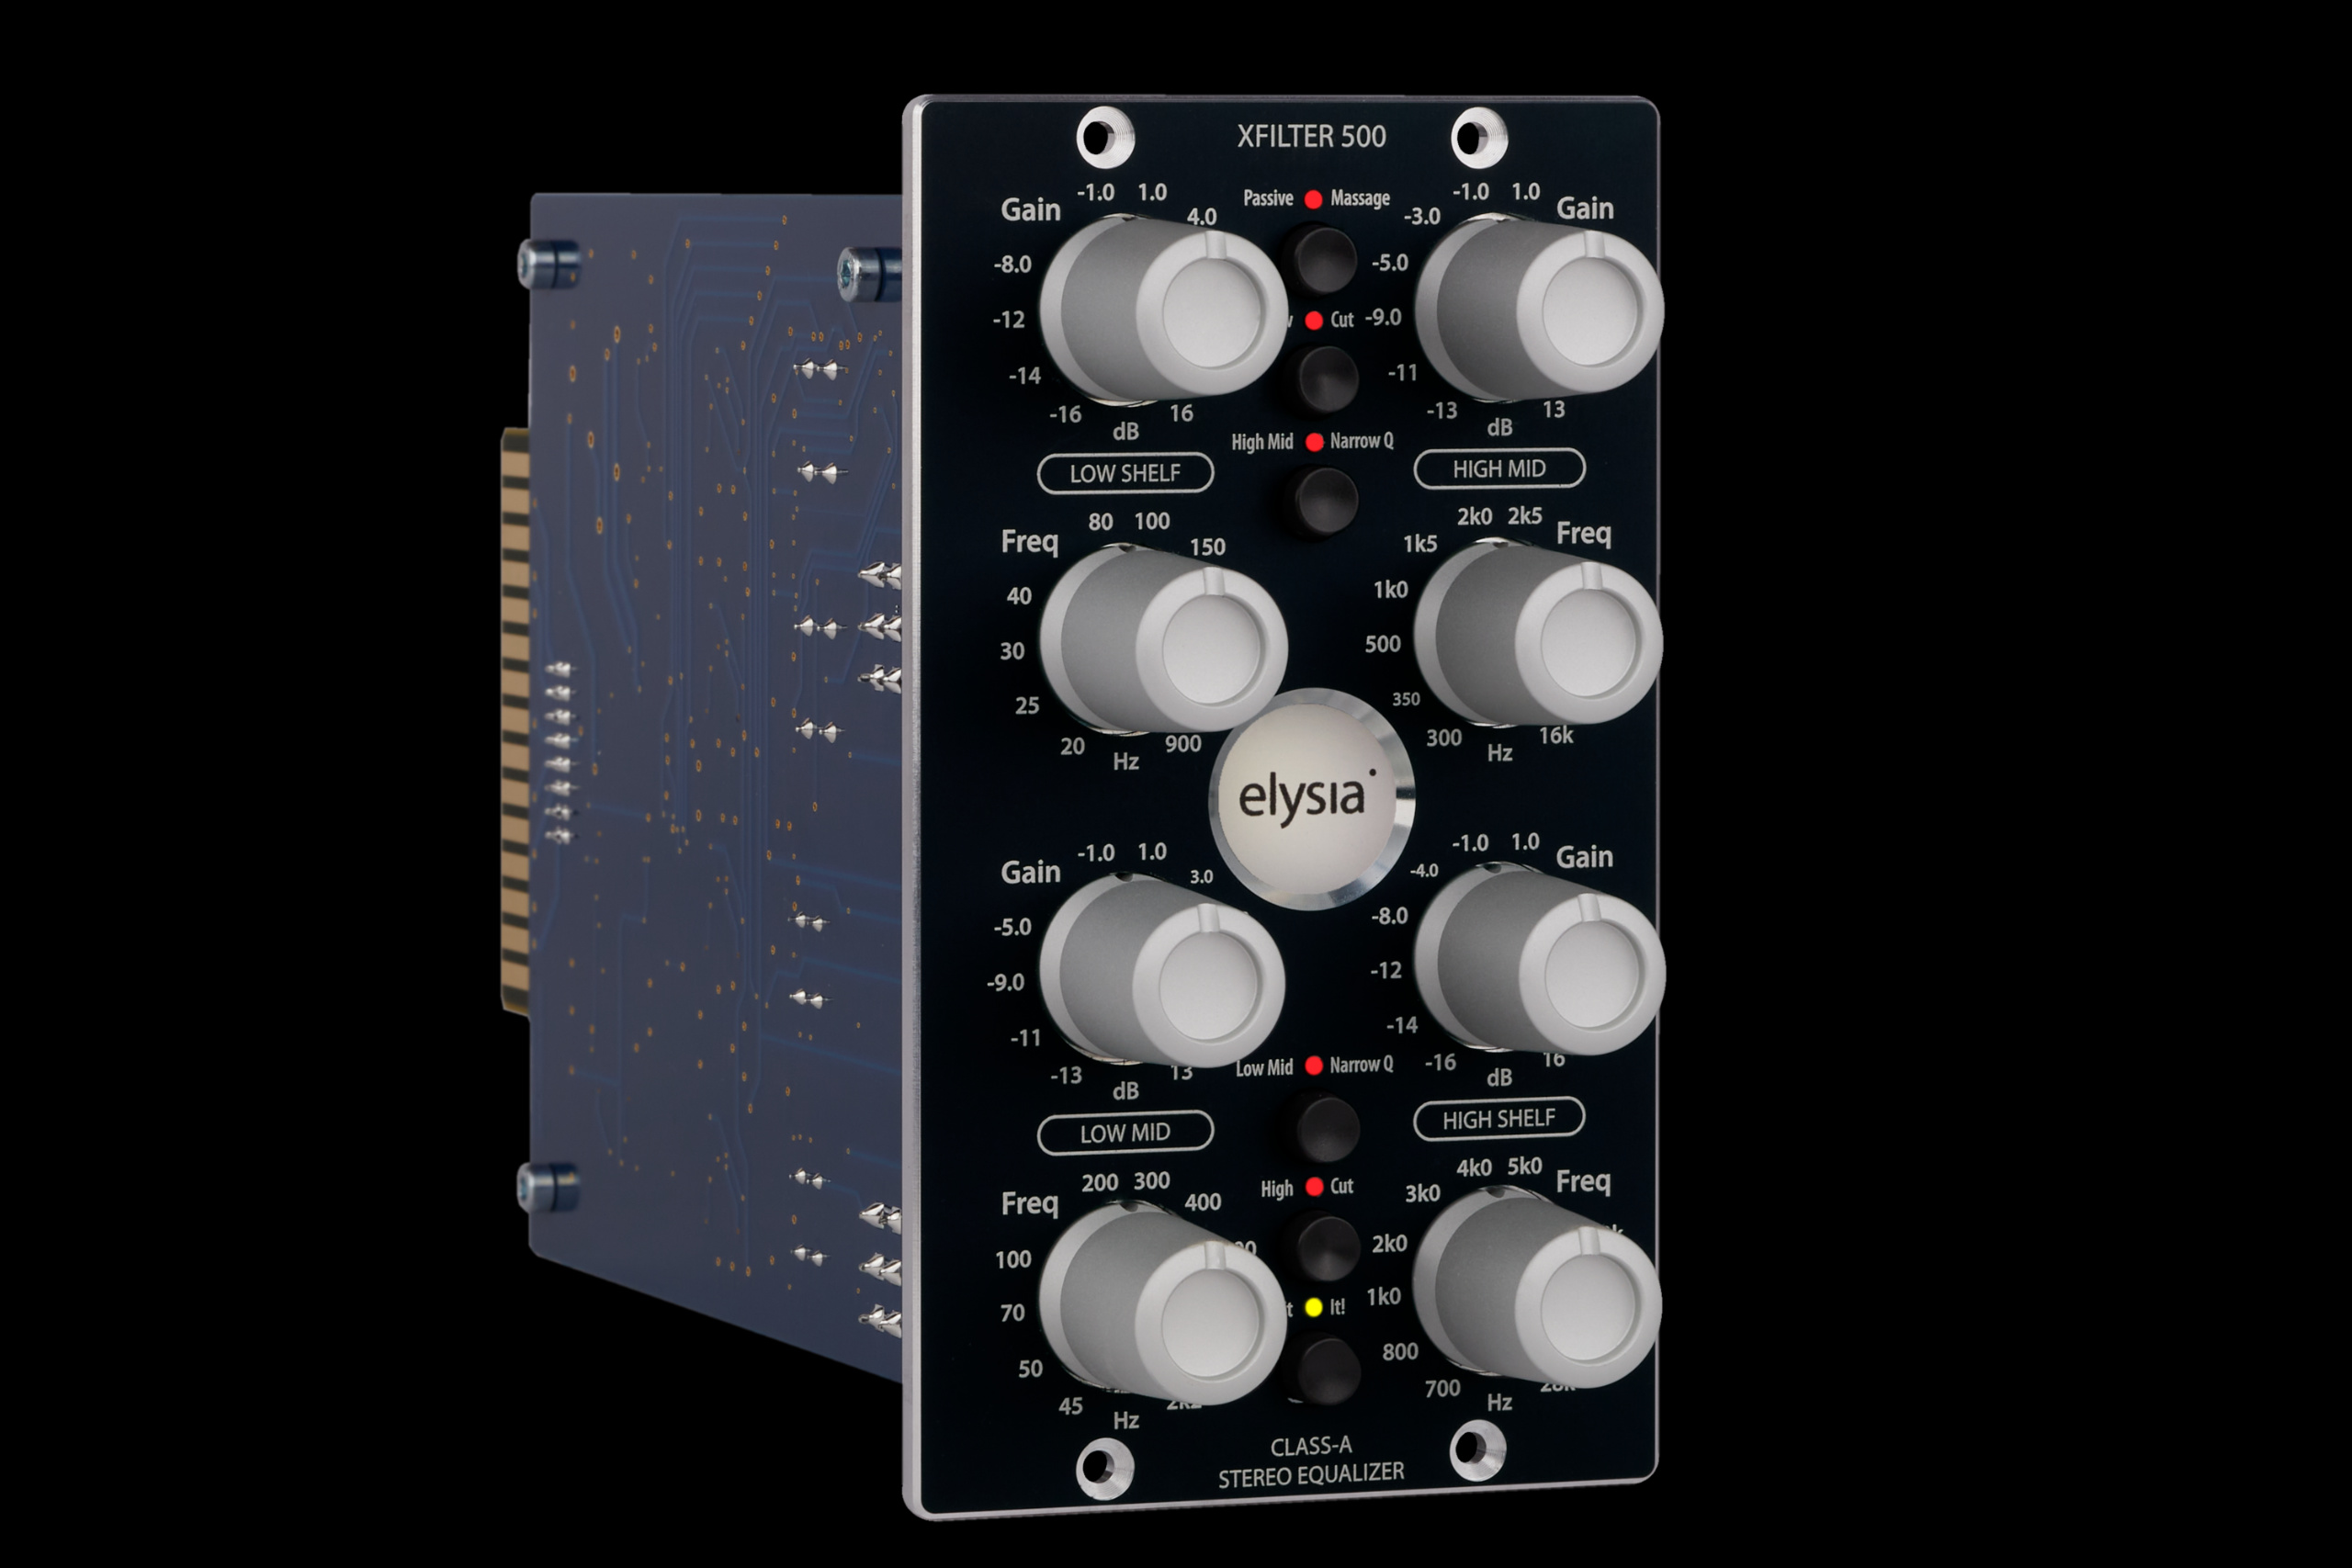 The elysia xfilter 500 is an analog stereo equalizer for recording mixing and mastering audio.